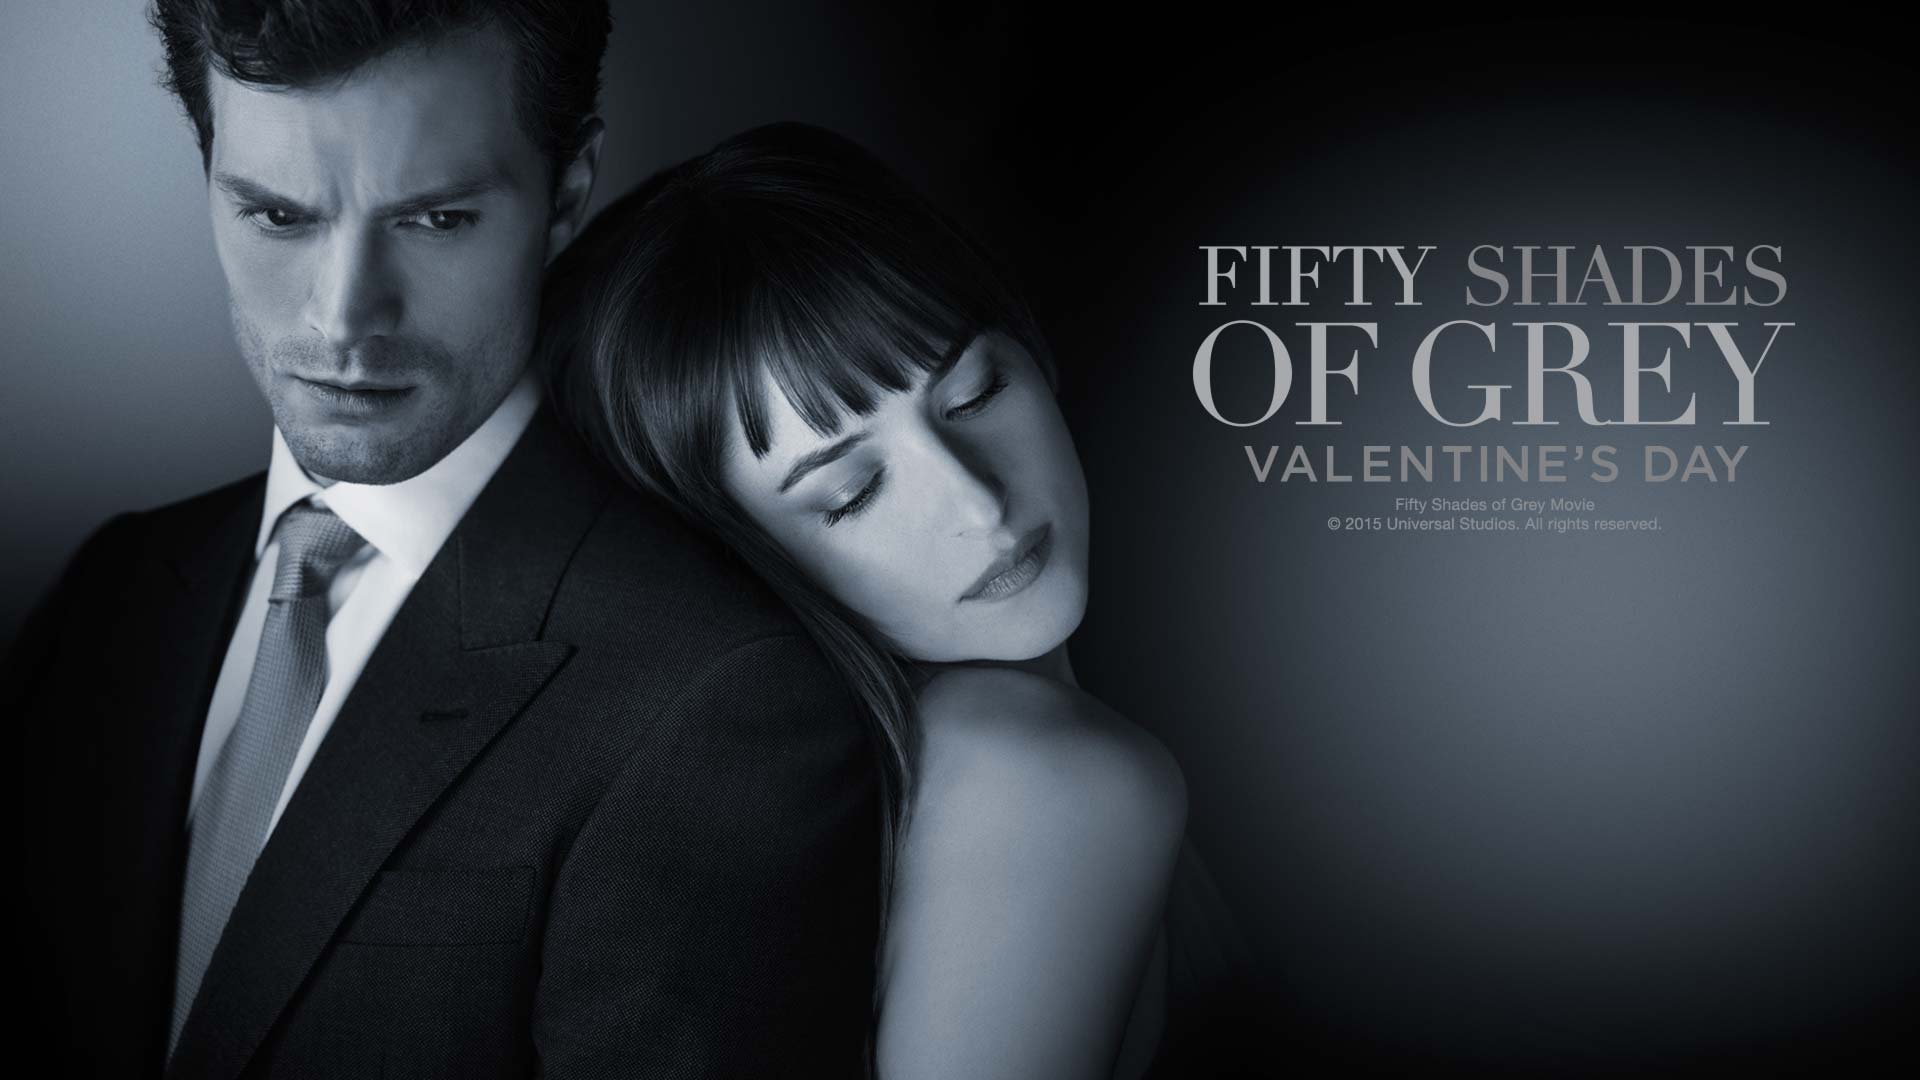 FIFTY SHADES OF GREY (2014). FILM REVIEW.